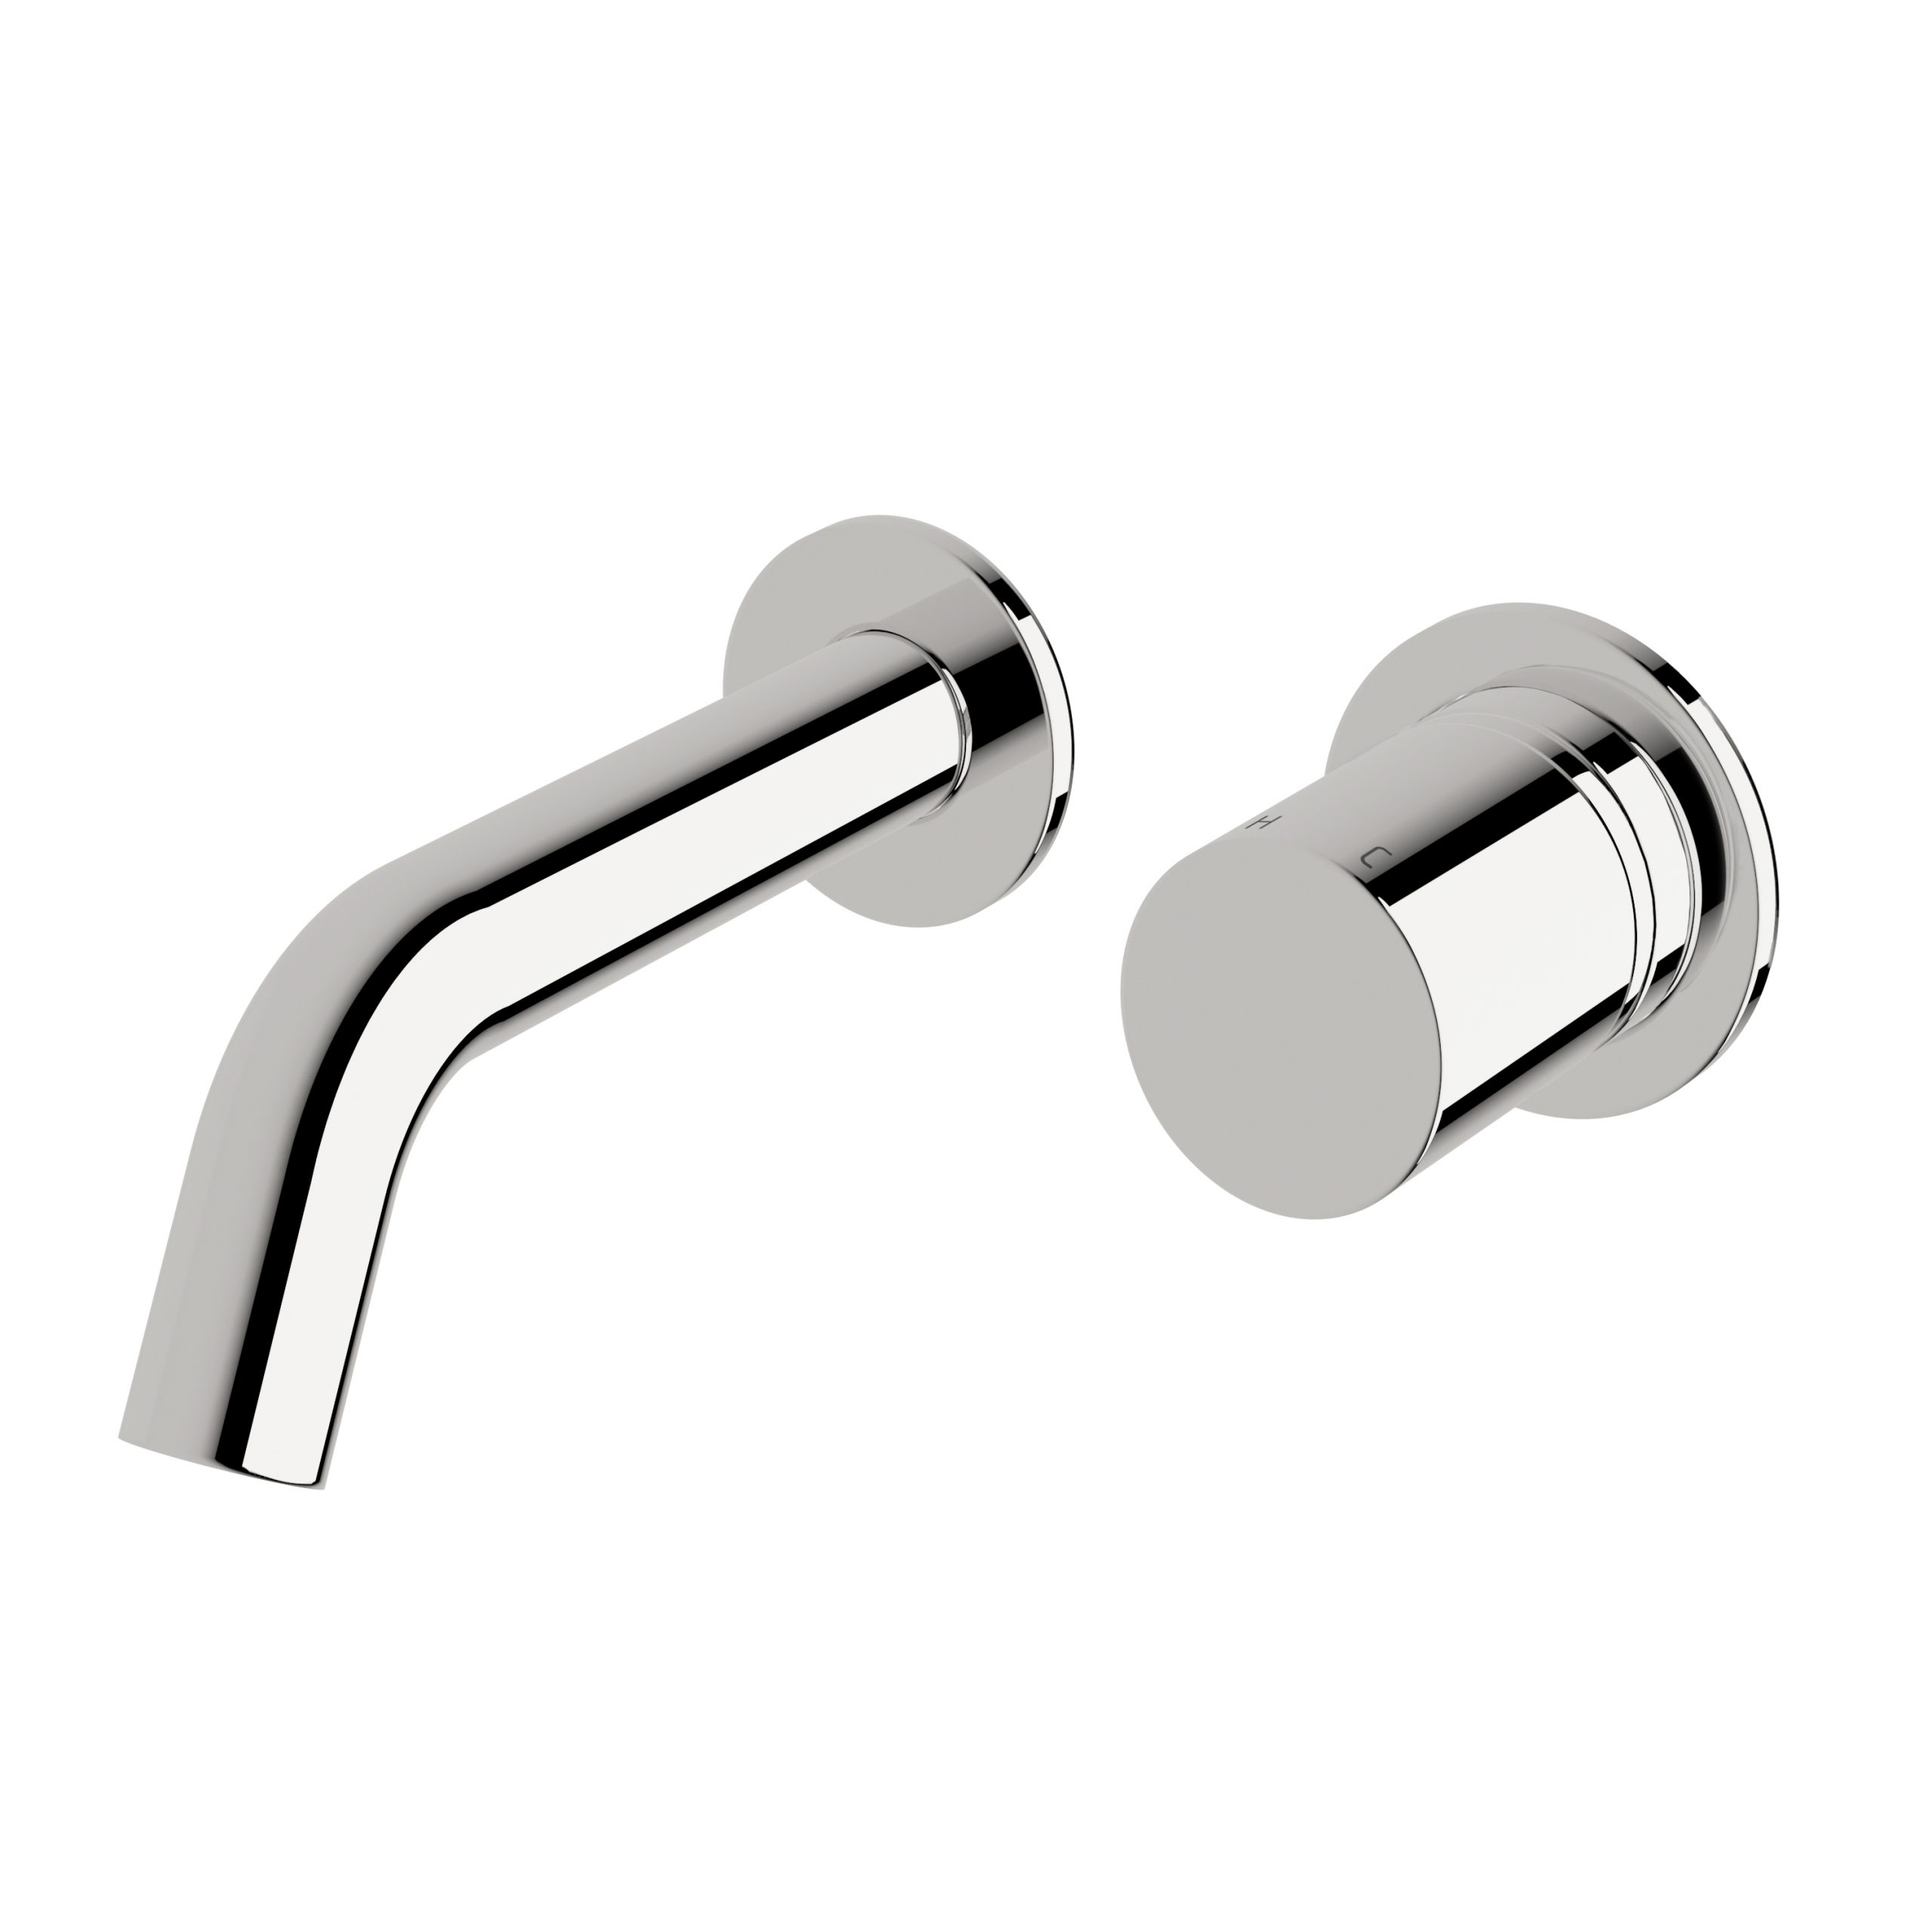 Sussex Circa Wall Basin Mixer with 150mm Spout